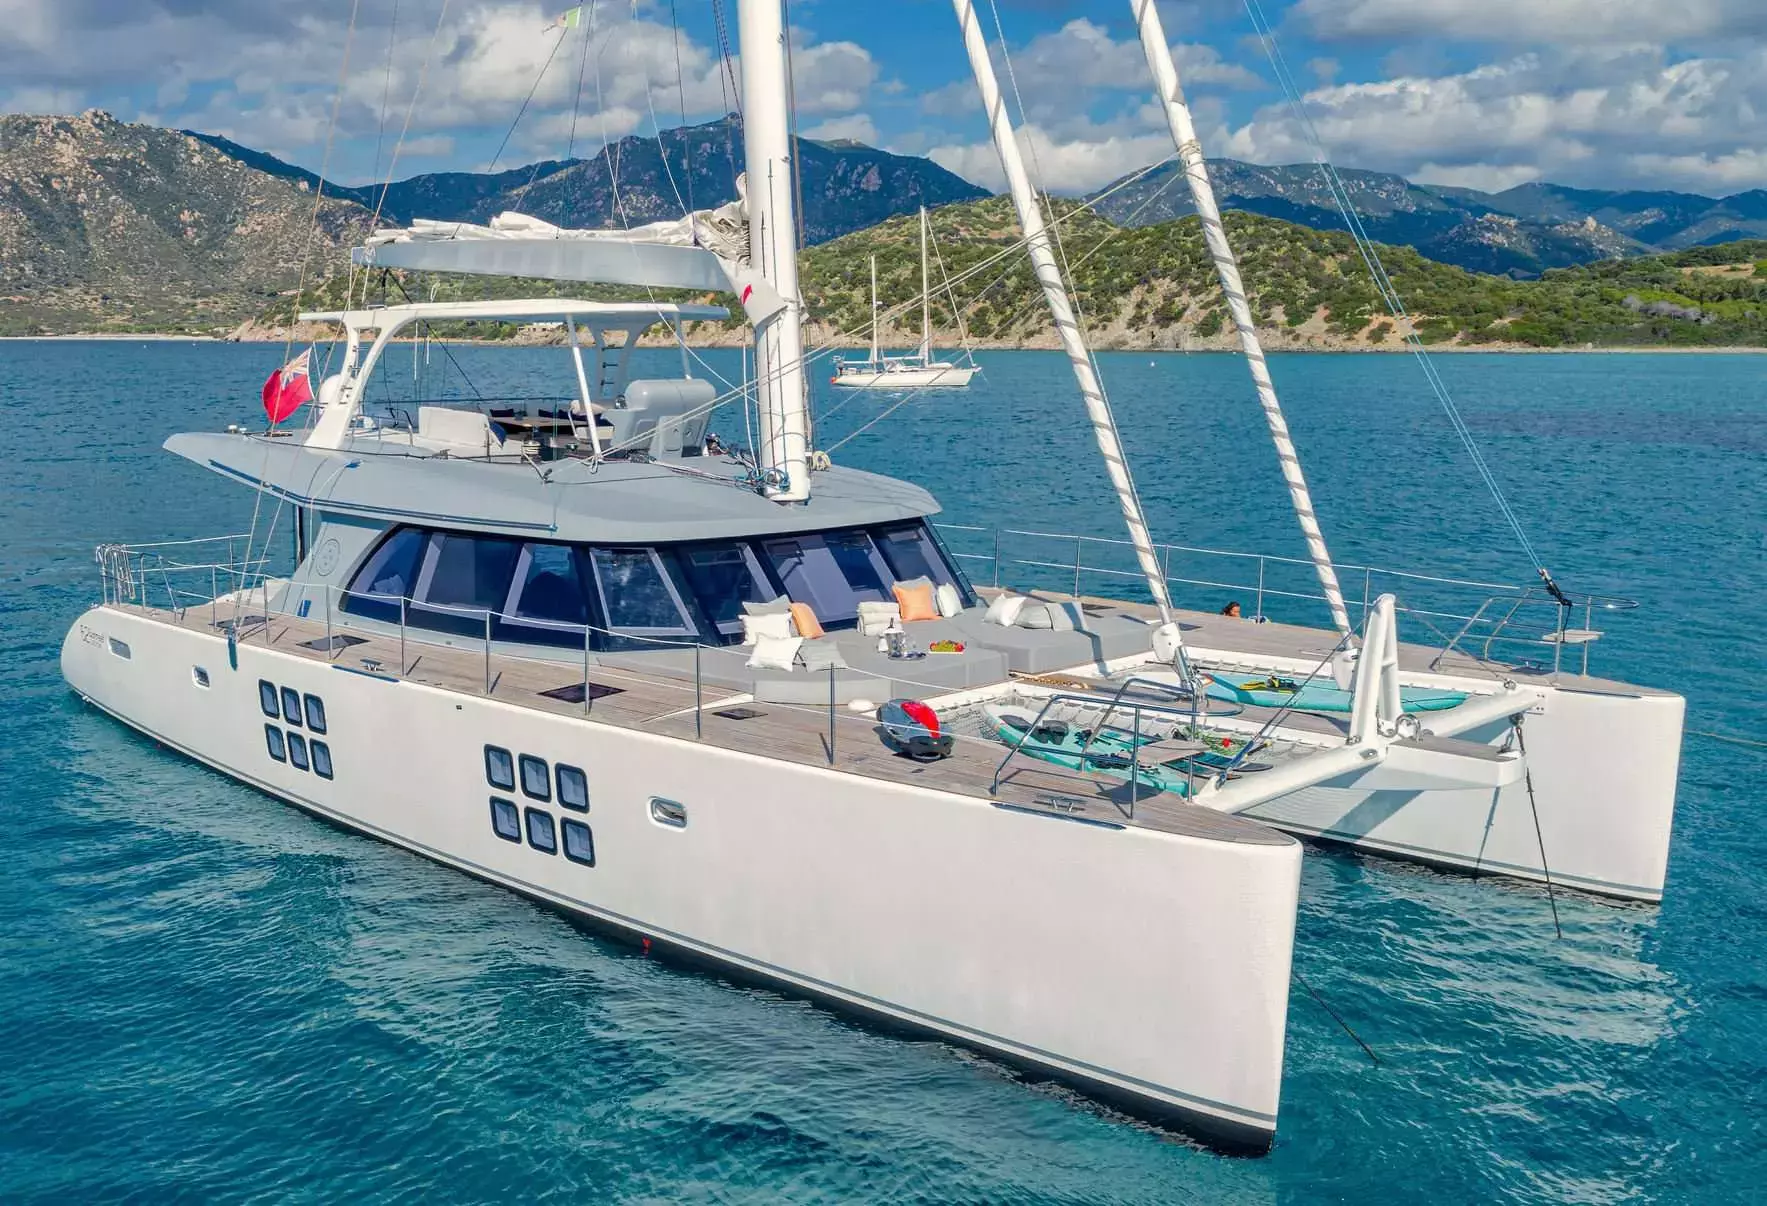 Adea by Sunreef Yachts - Top rates for a Rental of a private Sailing Catamaran in St Barths